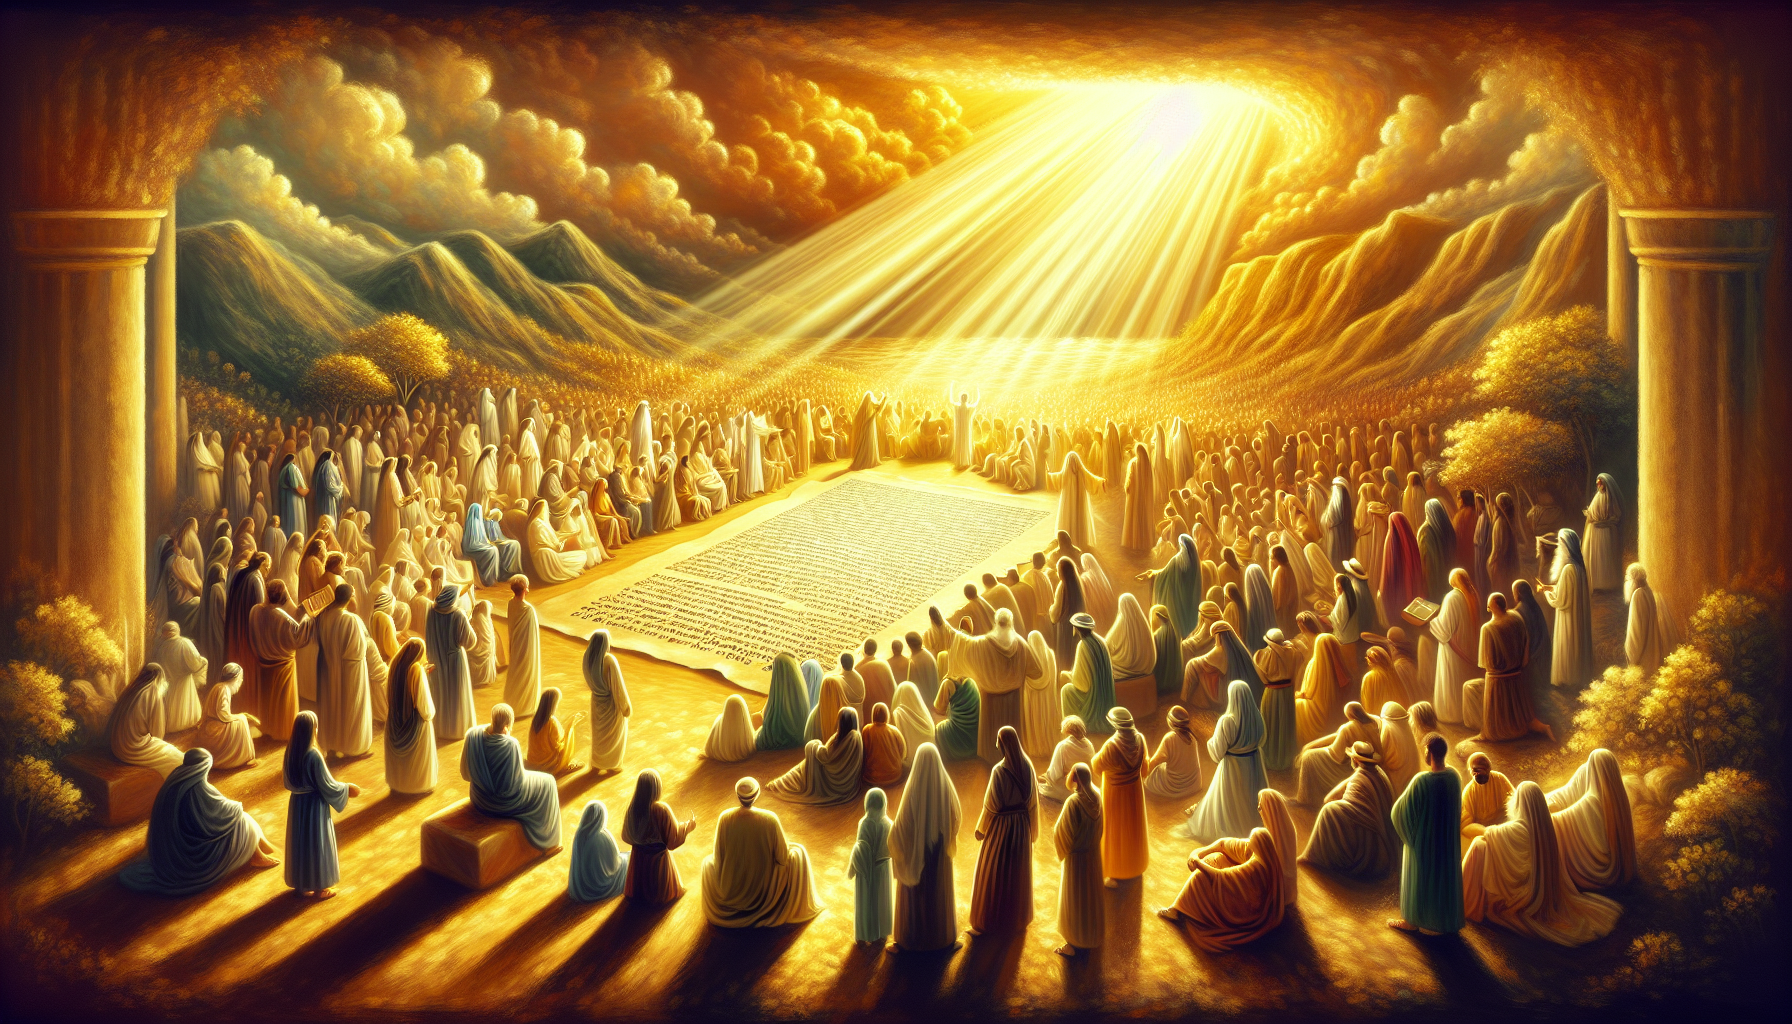 An artistically crafted digital painting illustrating a serene biblical scene where diverse people of different ethnicities are gathered around an ancient scroll illuminated with golden light, symboli